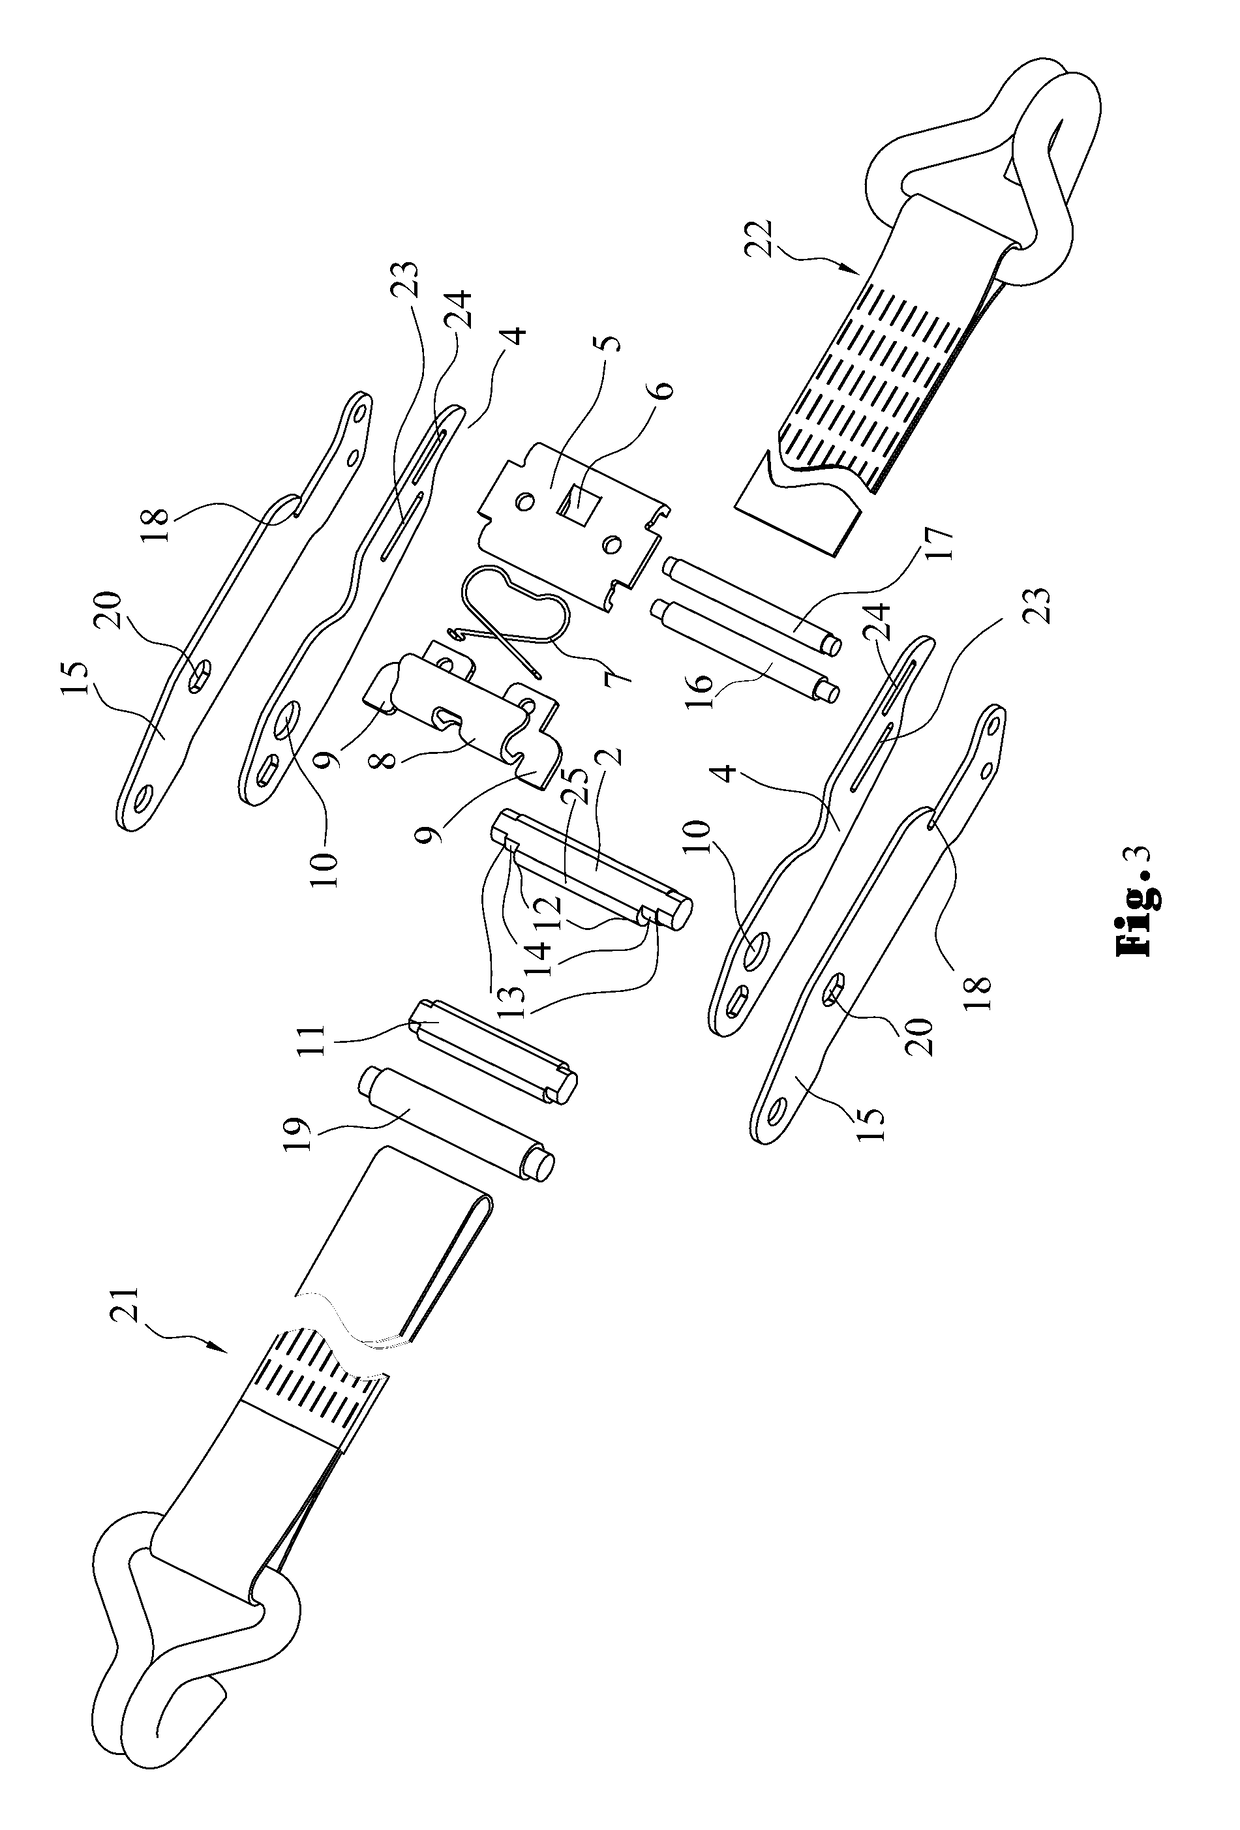 Anti-slip safety tensioning device for automobile